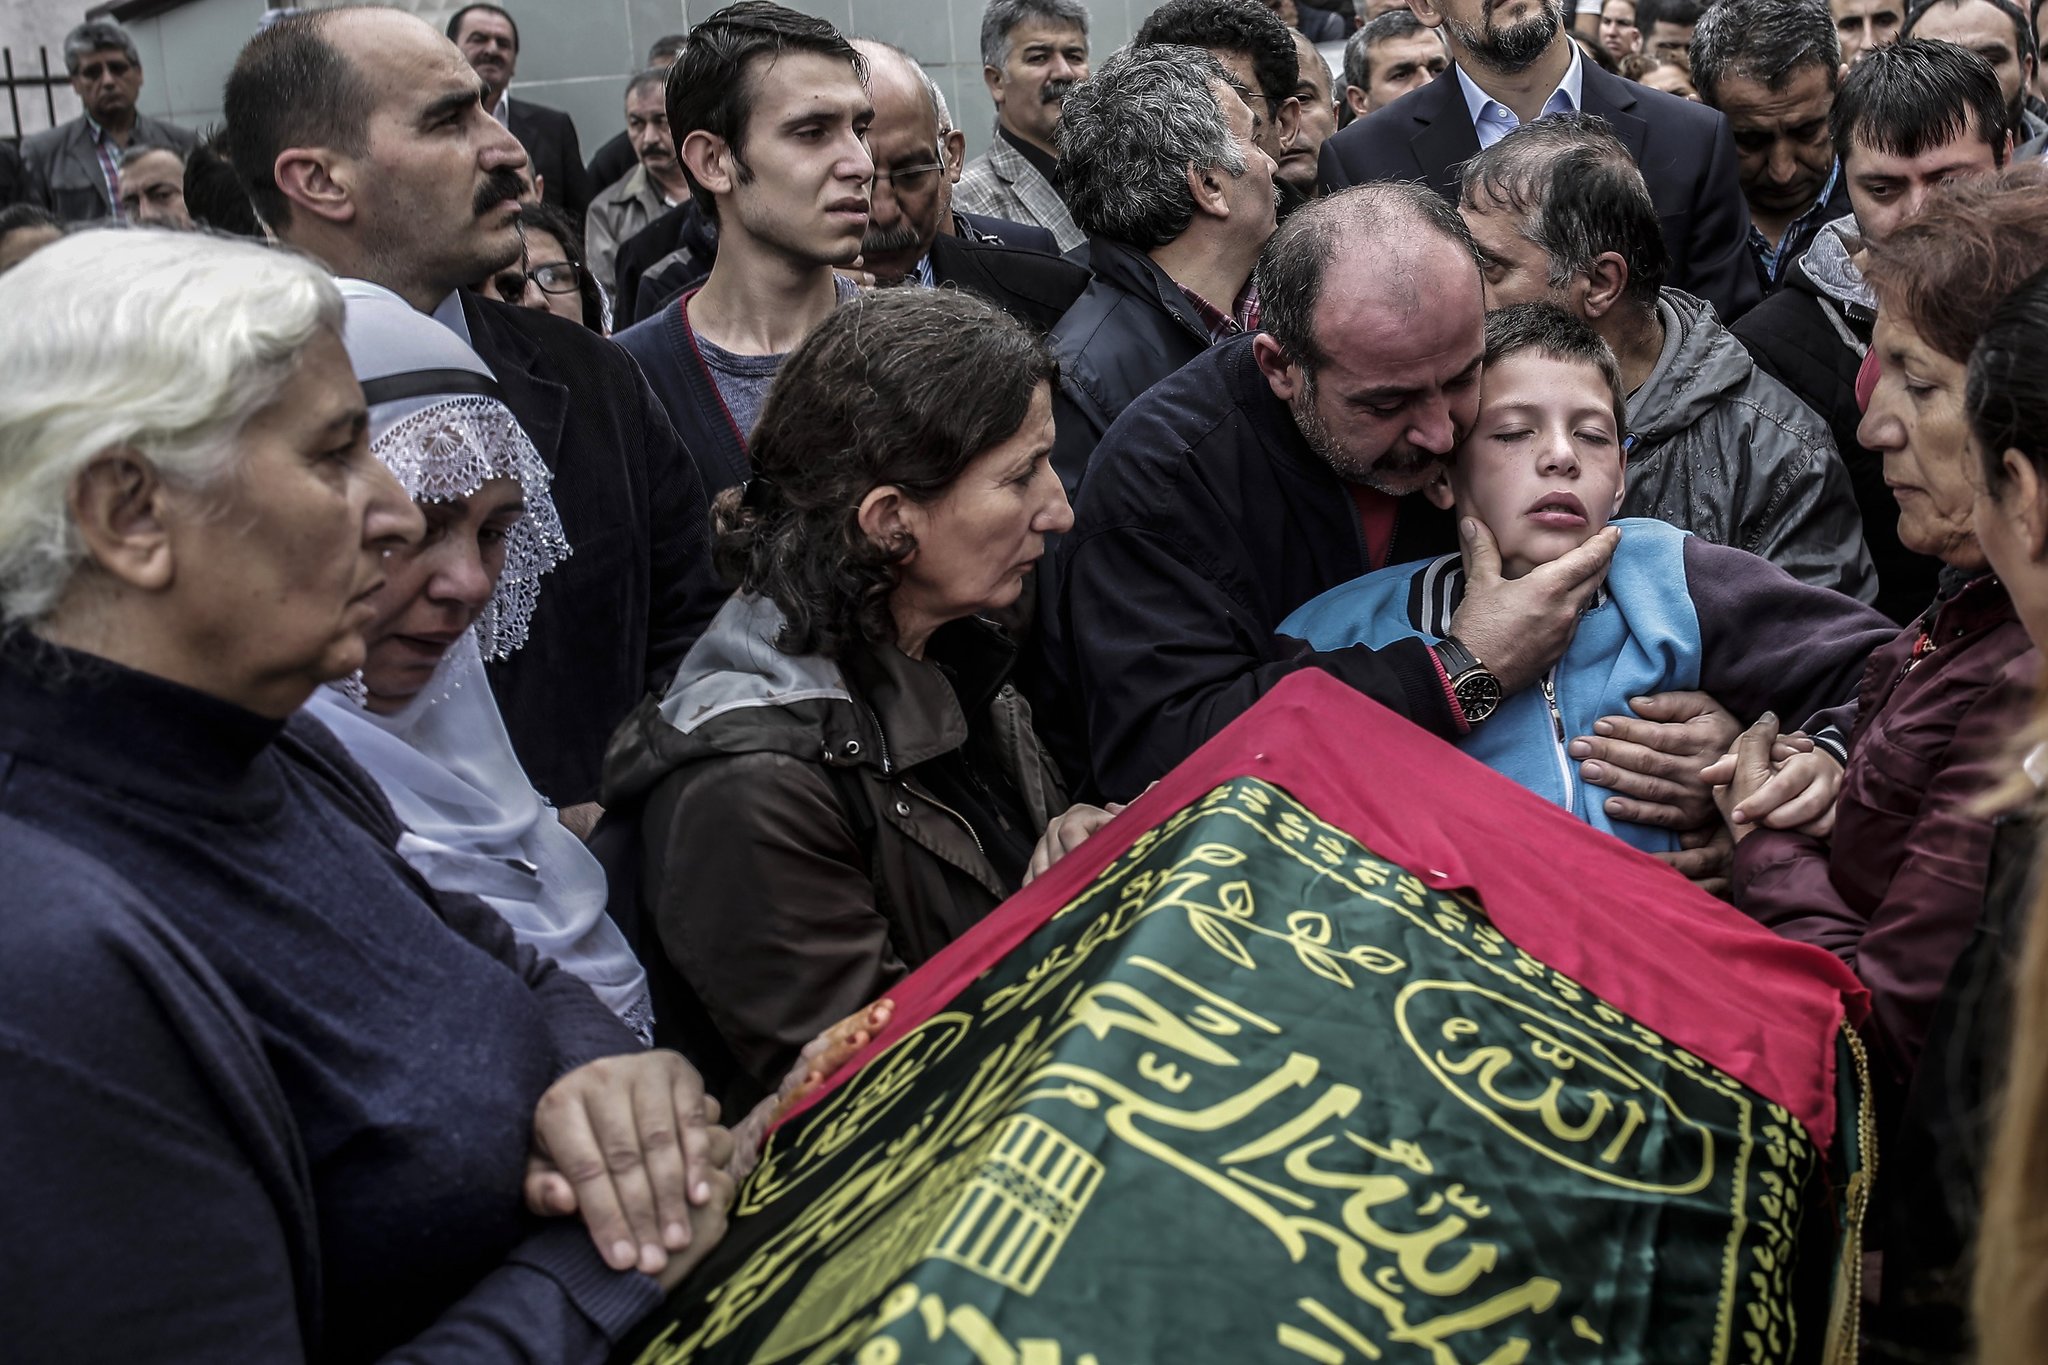 Relatives comfort nine-year-old Cayan Tuylu near the casket of his father Sarigul, a victim of the twin bombings in Ankara the day before, at his funeral in Istanbul on Sunday. Picture by Yasin Akgul | Agence France-Presse/Getty Images